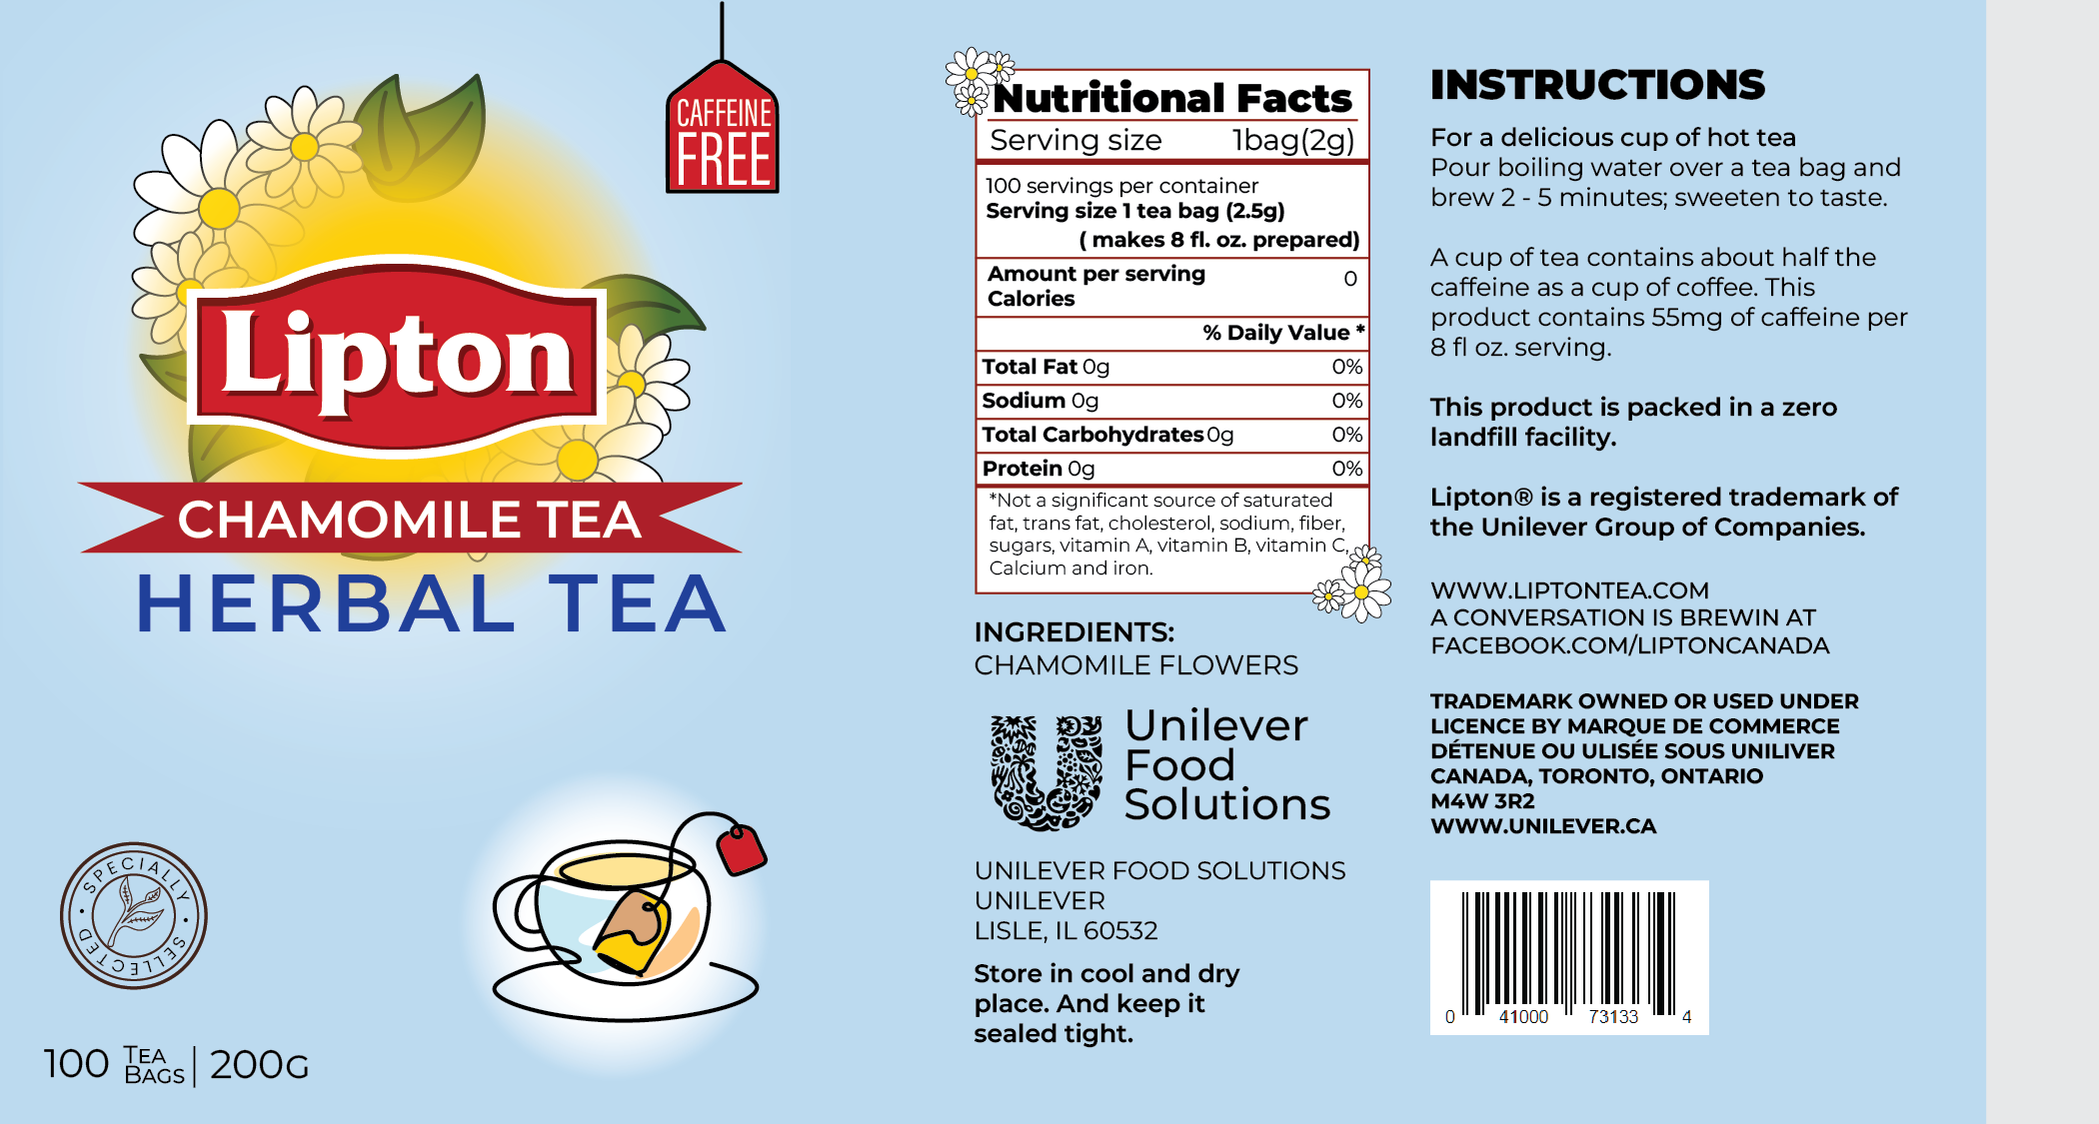 Chamomile tea sleeve design, using a baby blue background with flowers around the Lipton logo and a cup of tea at the bottom right